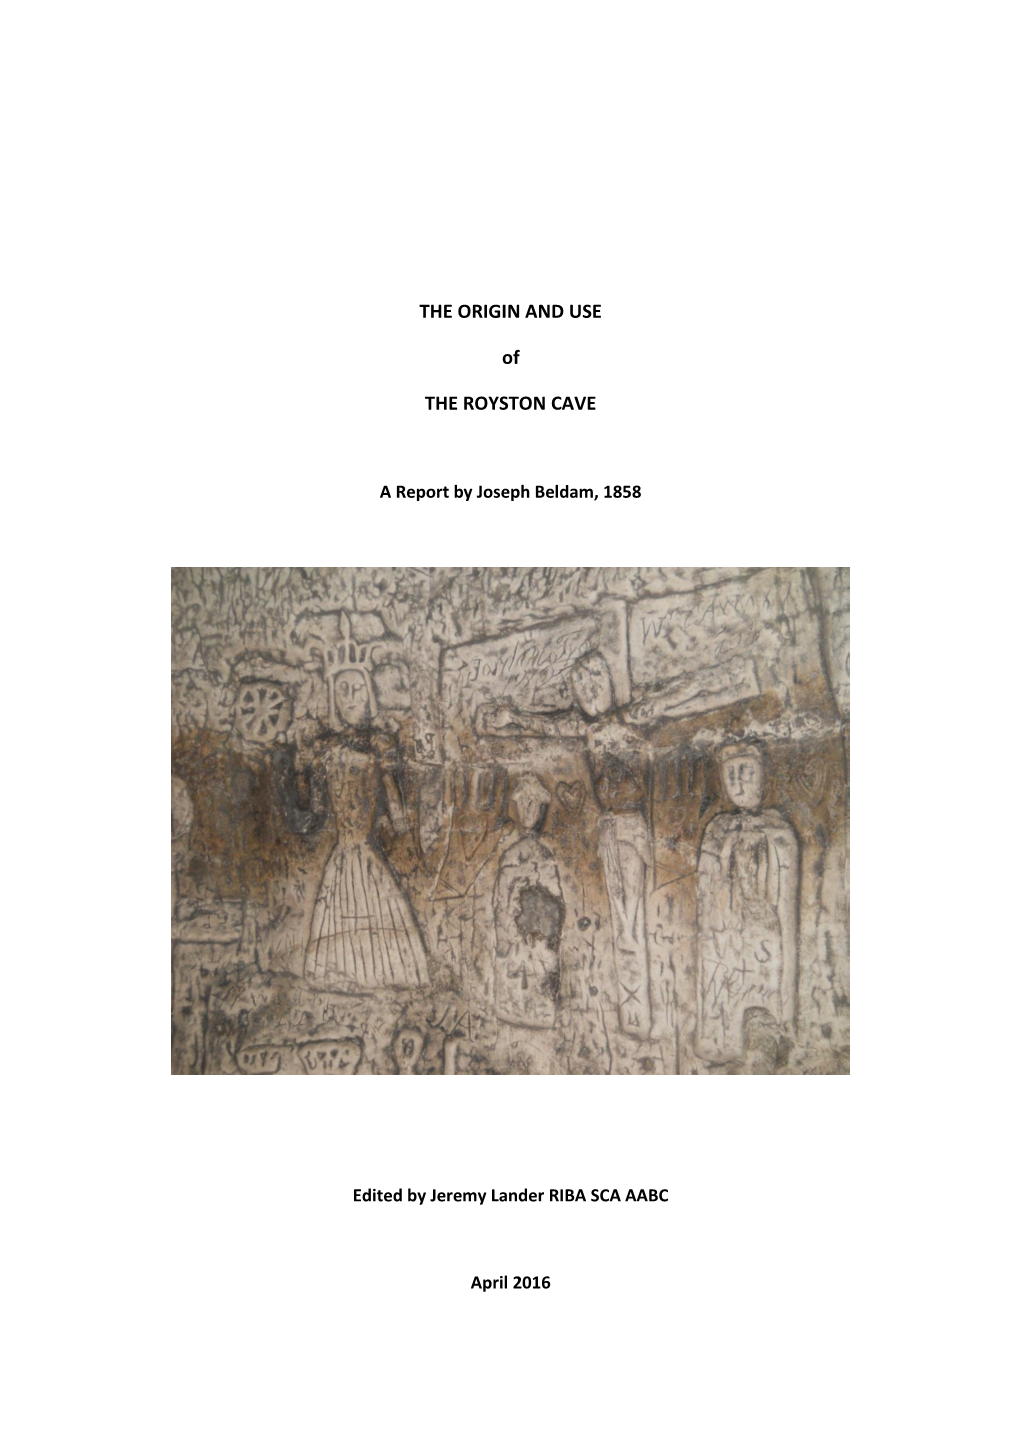 THE ORIGIN and USE of the ROYSTON CAVE